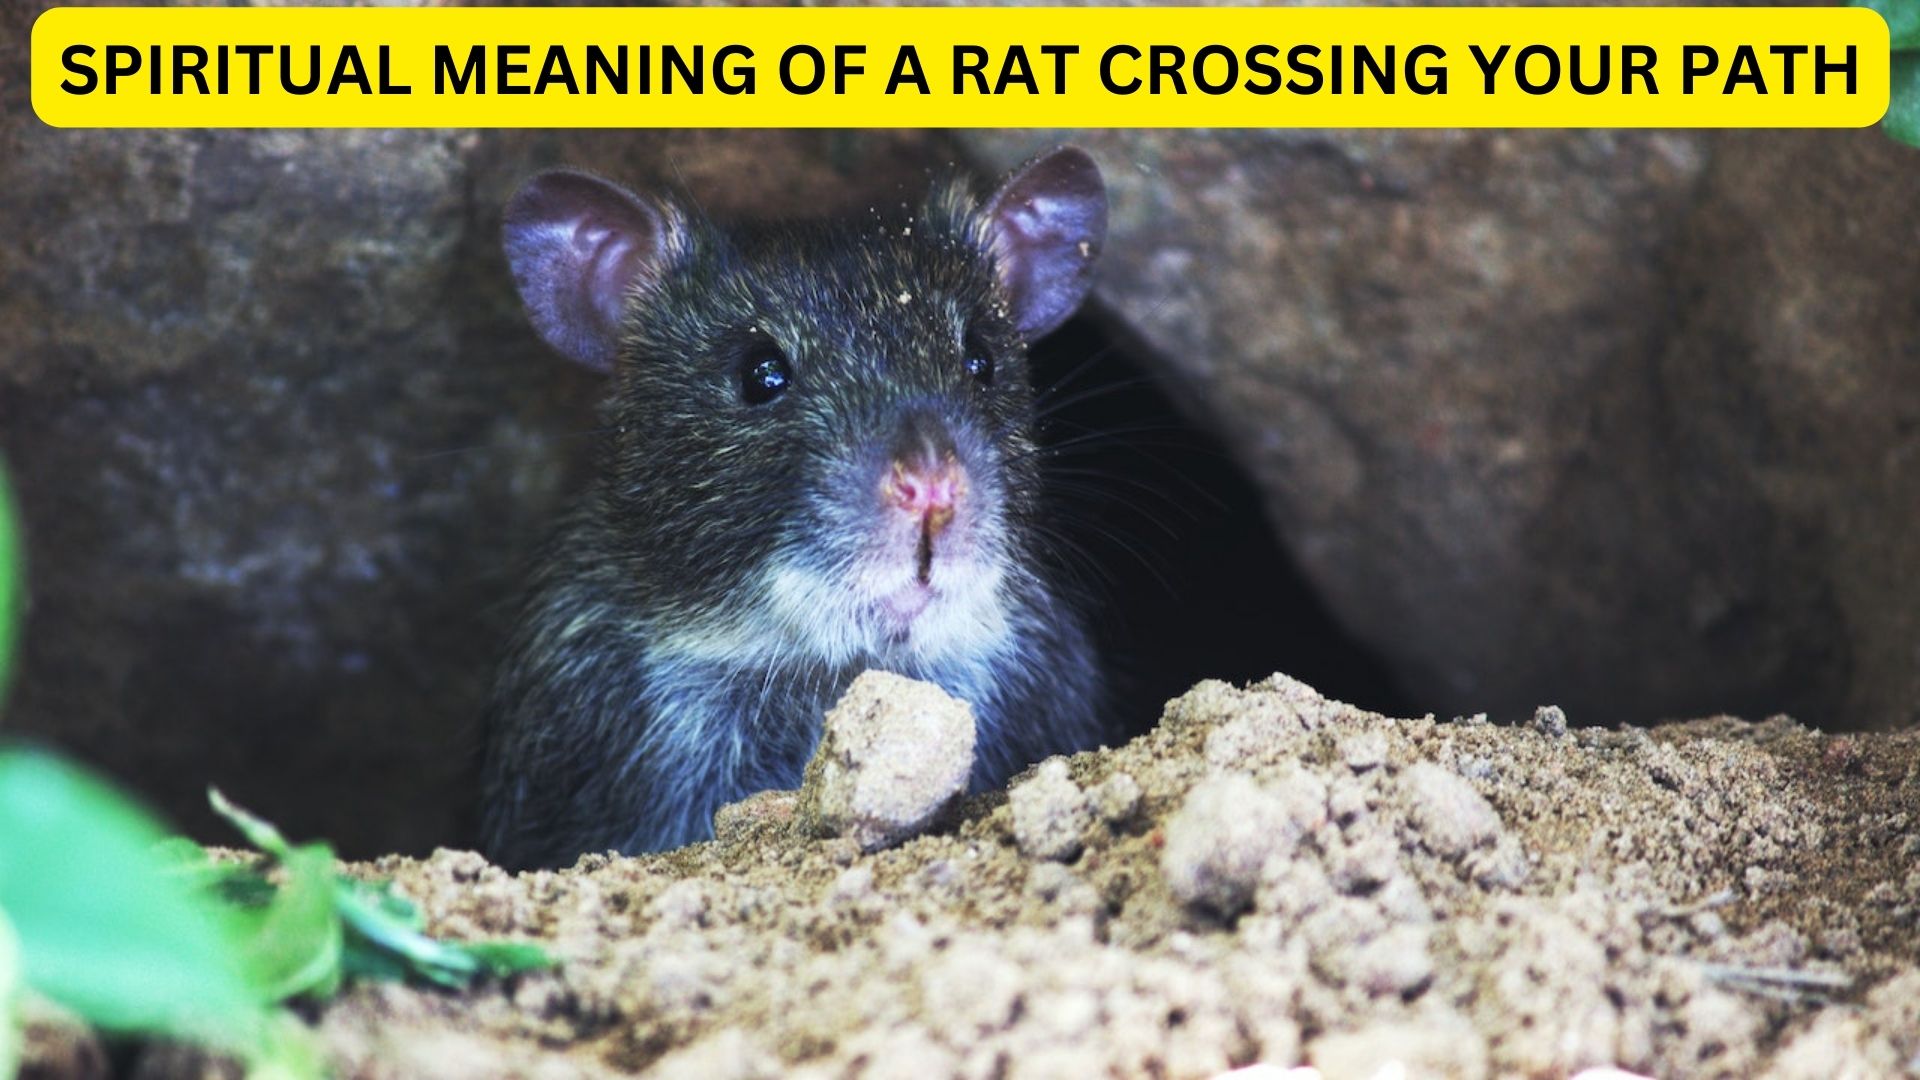 Spiritual Meaning Of A Rat Crossing Your Path - A Symbol Of Anxiety, Doubt, And Distrust